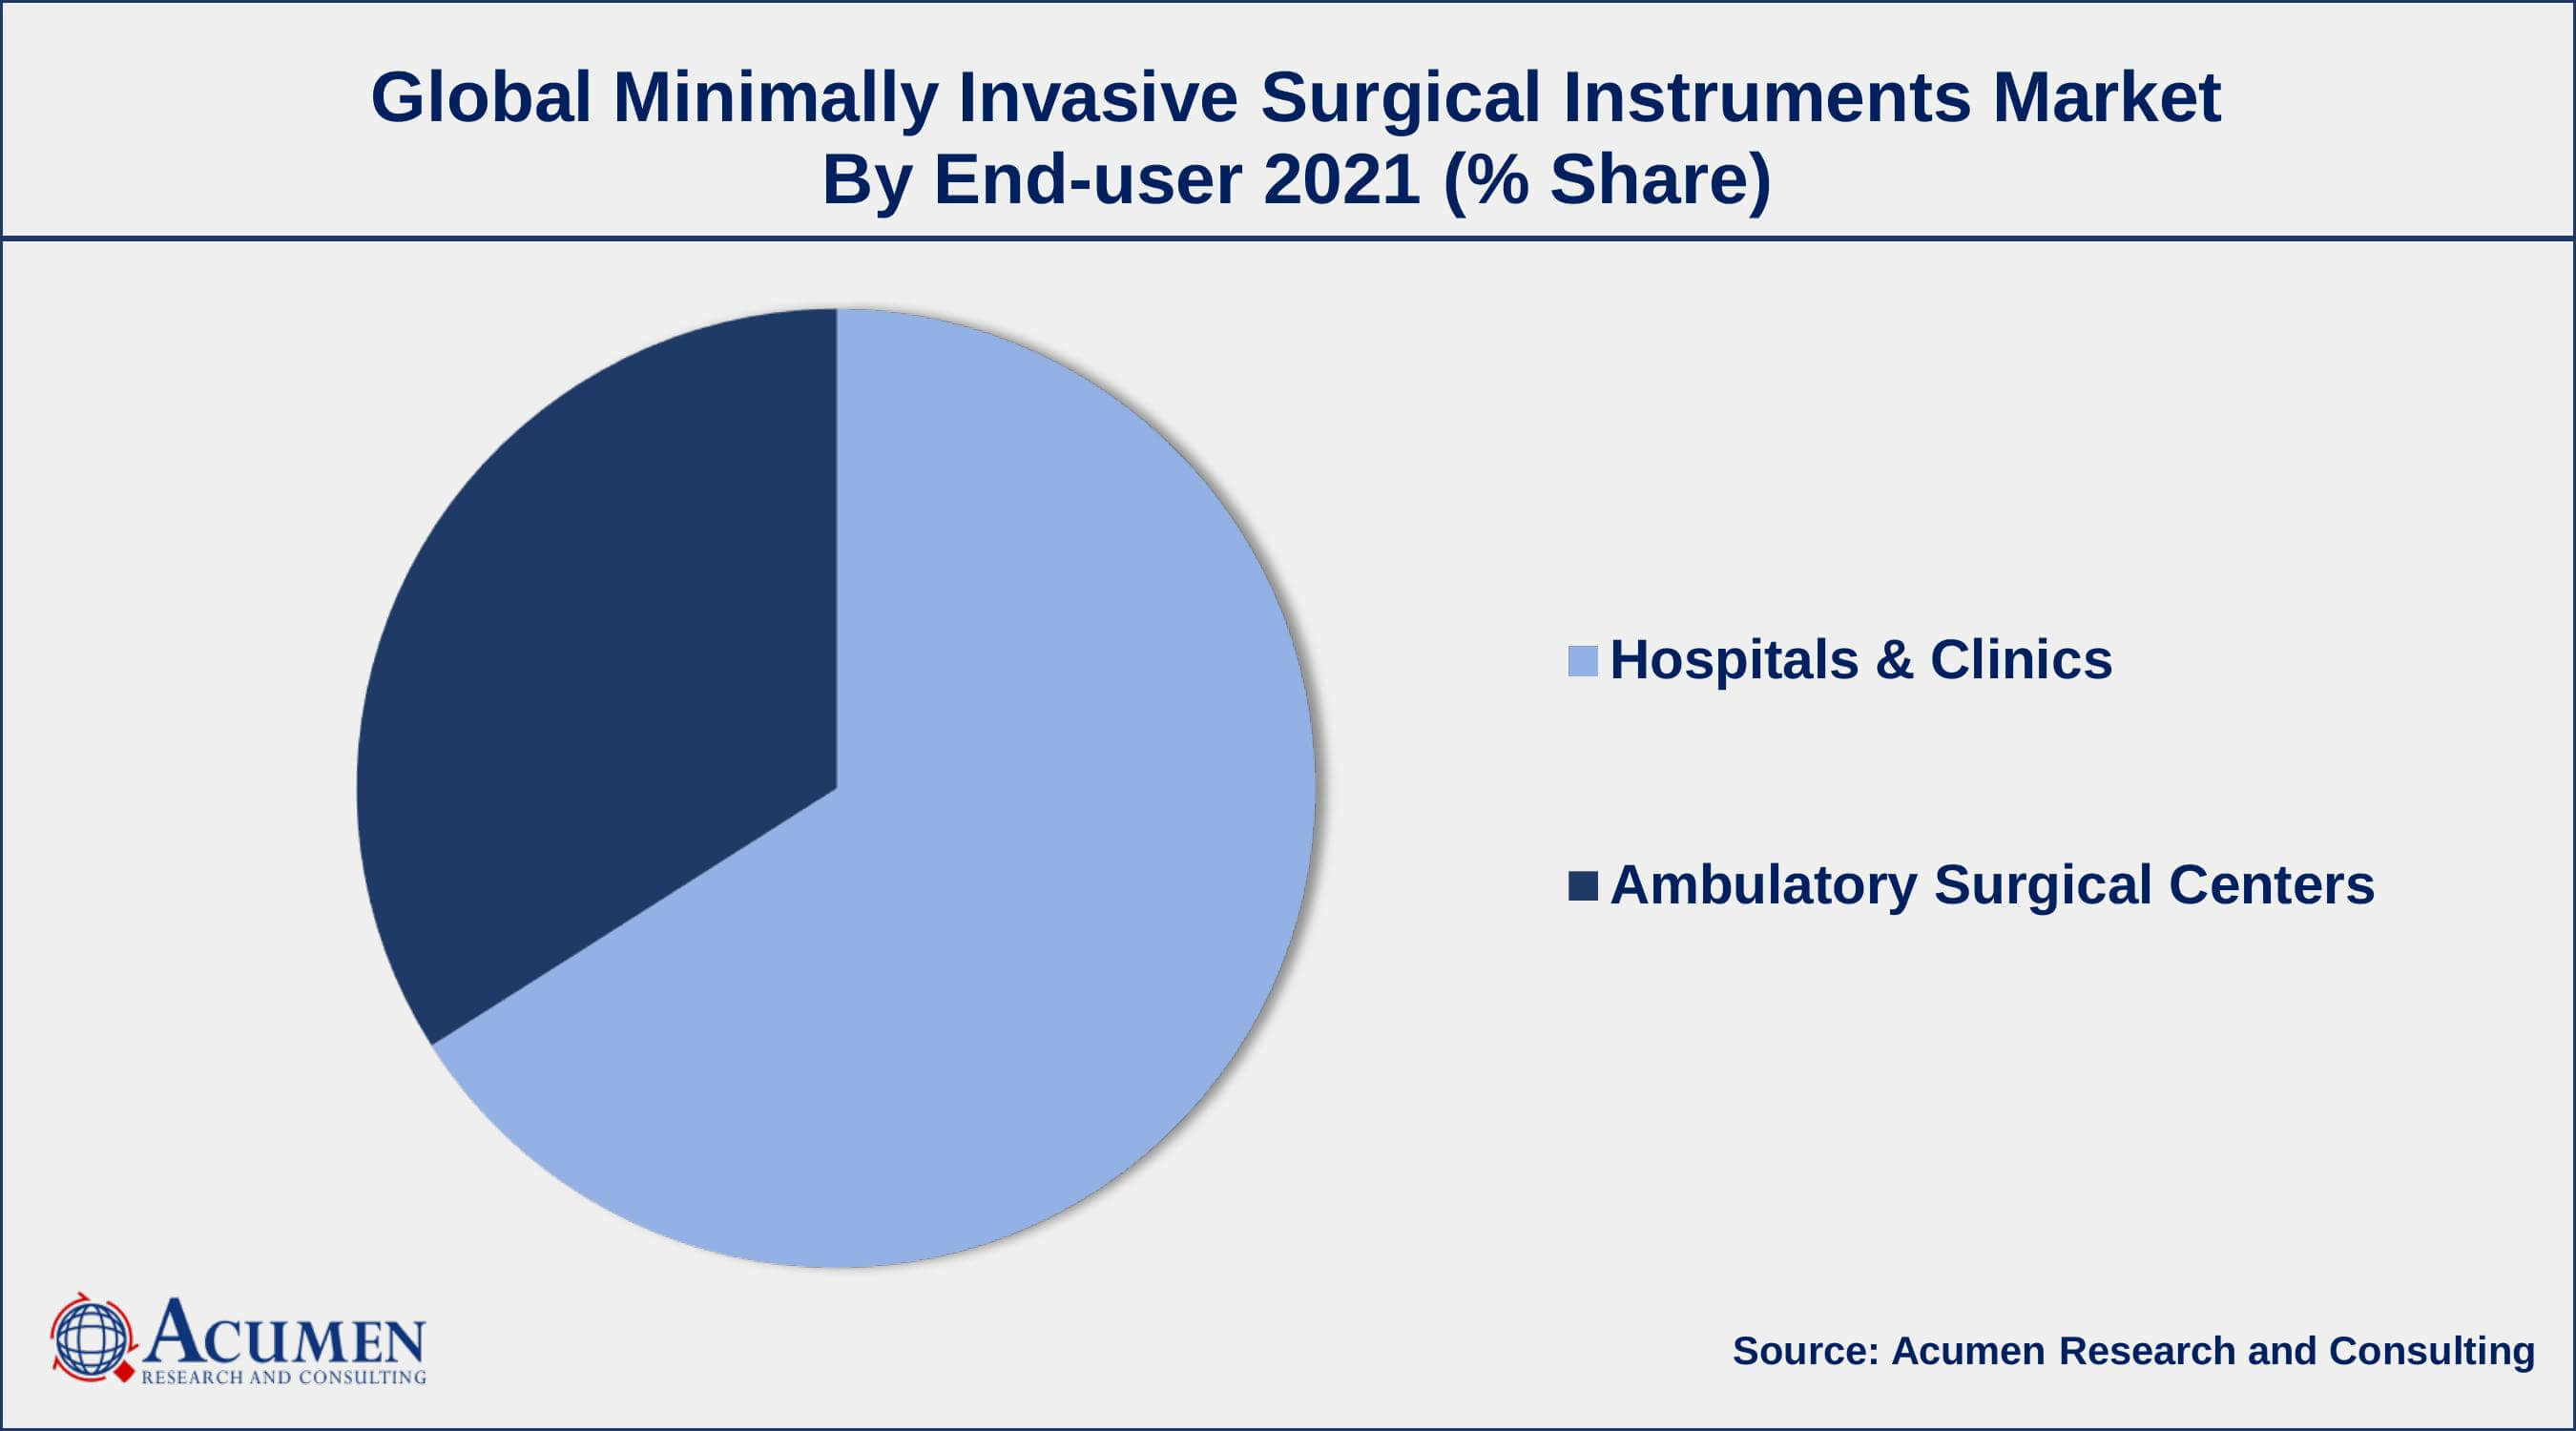 Among end-user, ambulatory surgical center's sector is growing at a strongest CAGR over the forecast period